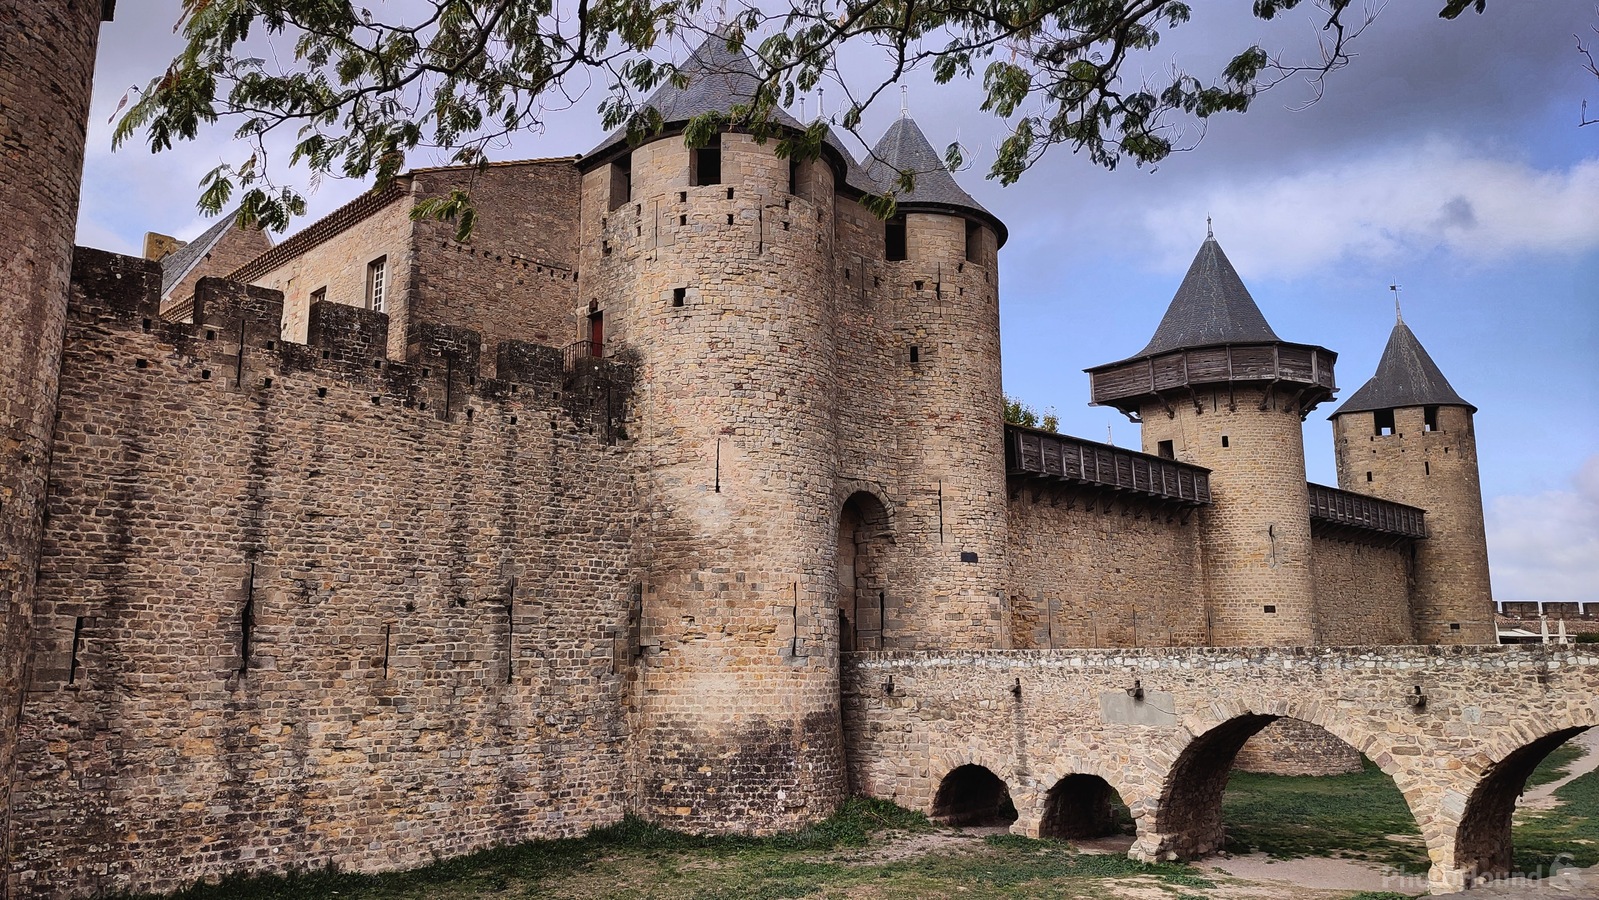 Image of Carcassonne Castle by David Lally